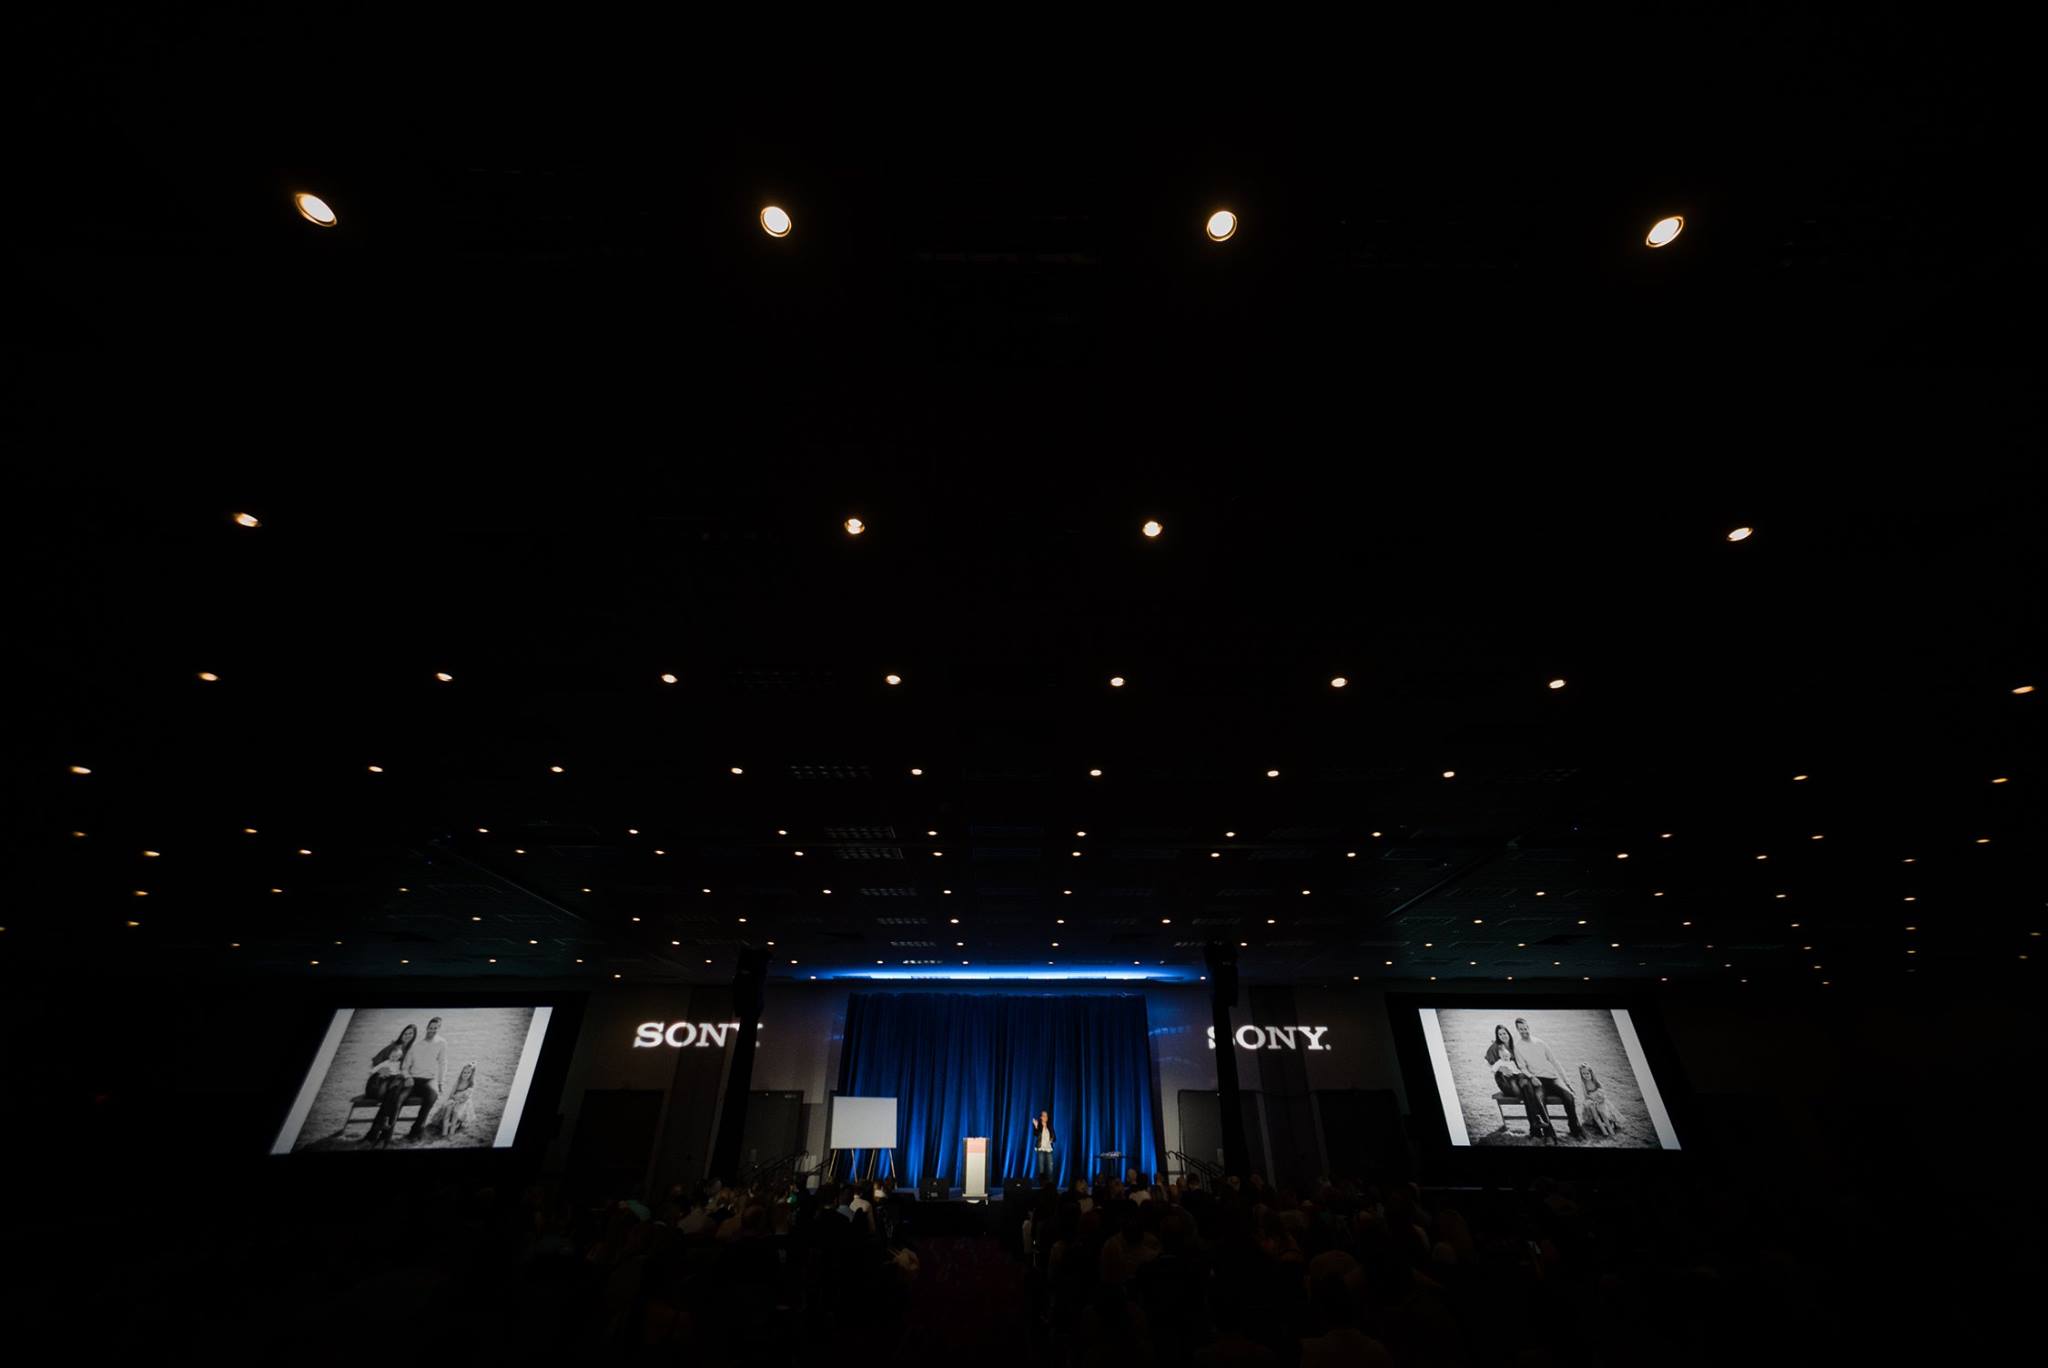 Me Ra Koh gives the keynote for WPPI Conference in Las Vegas